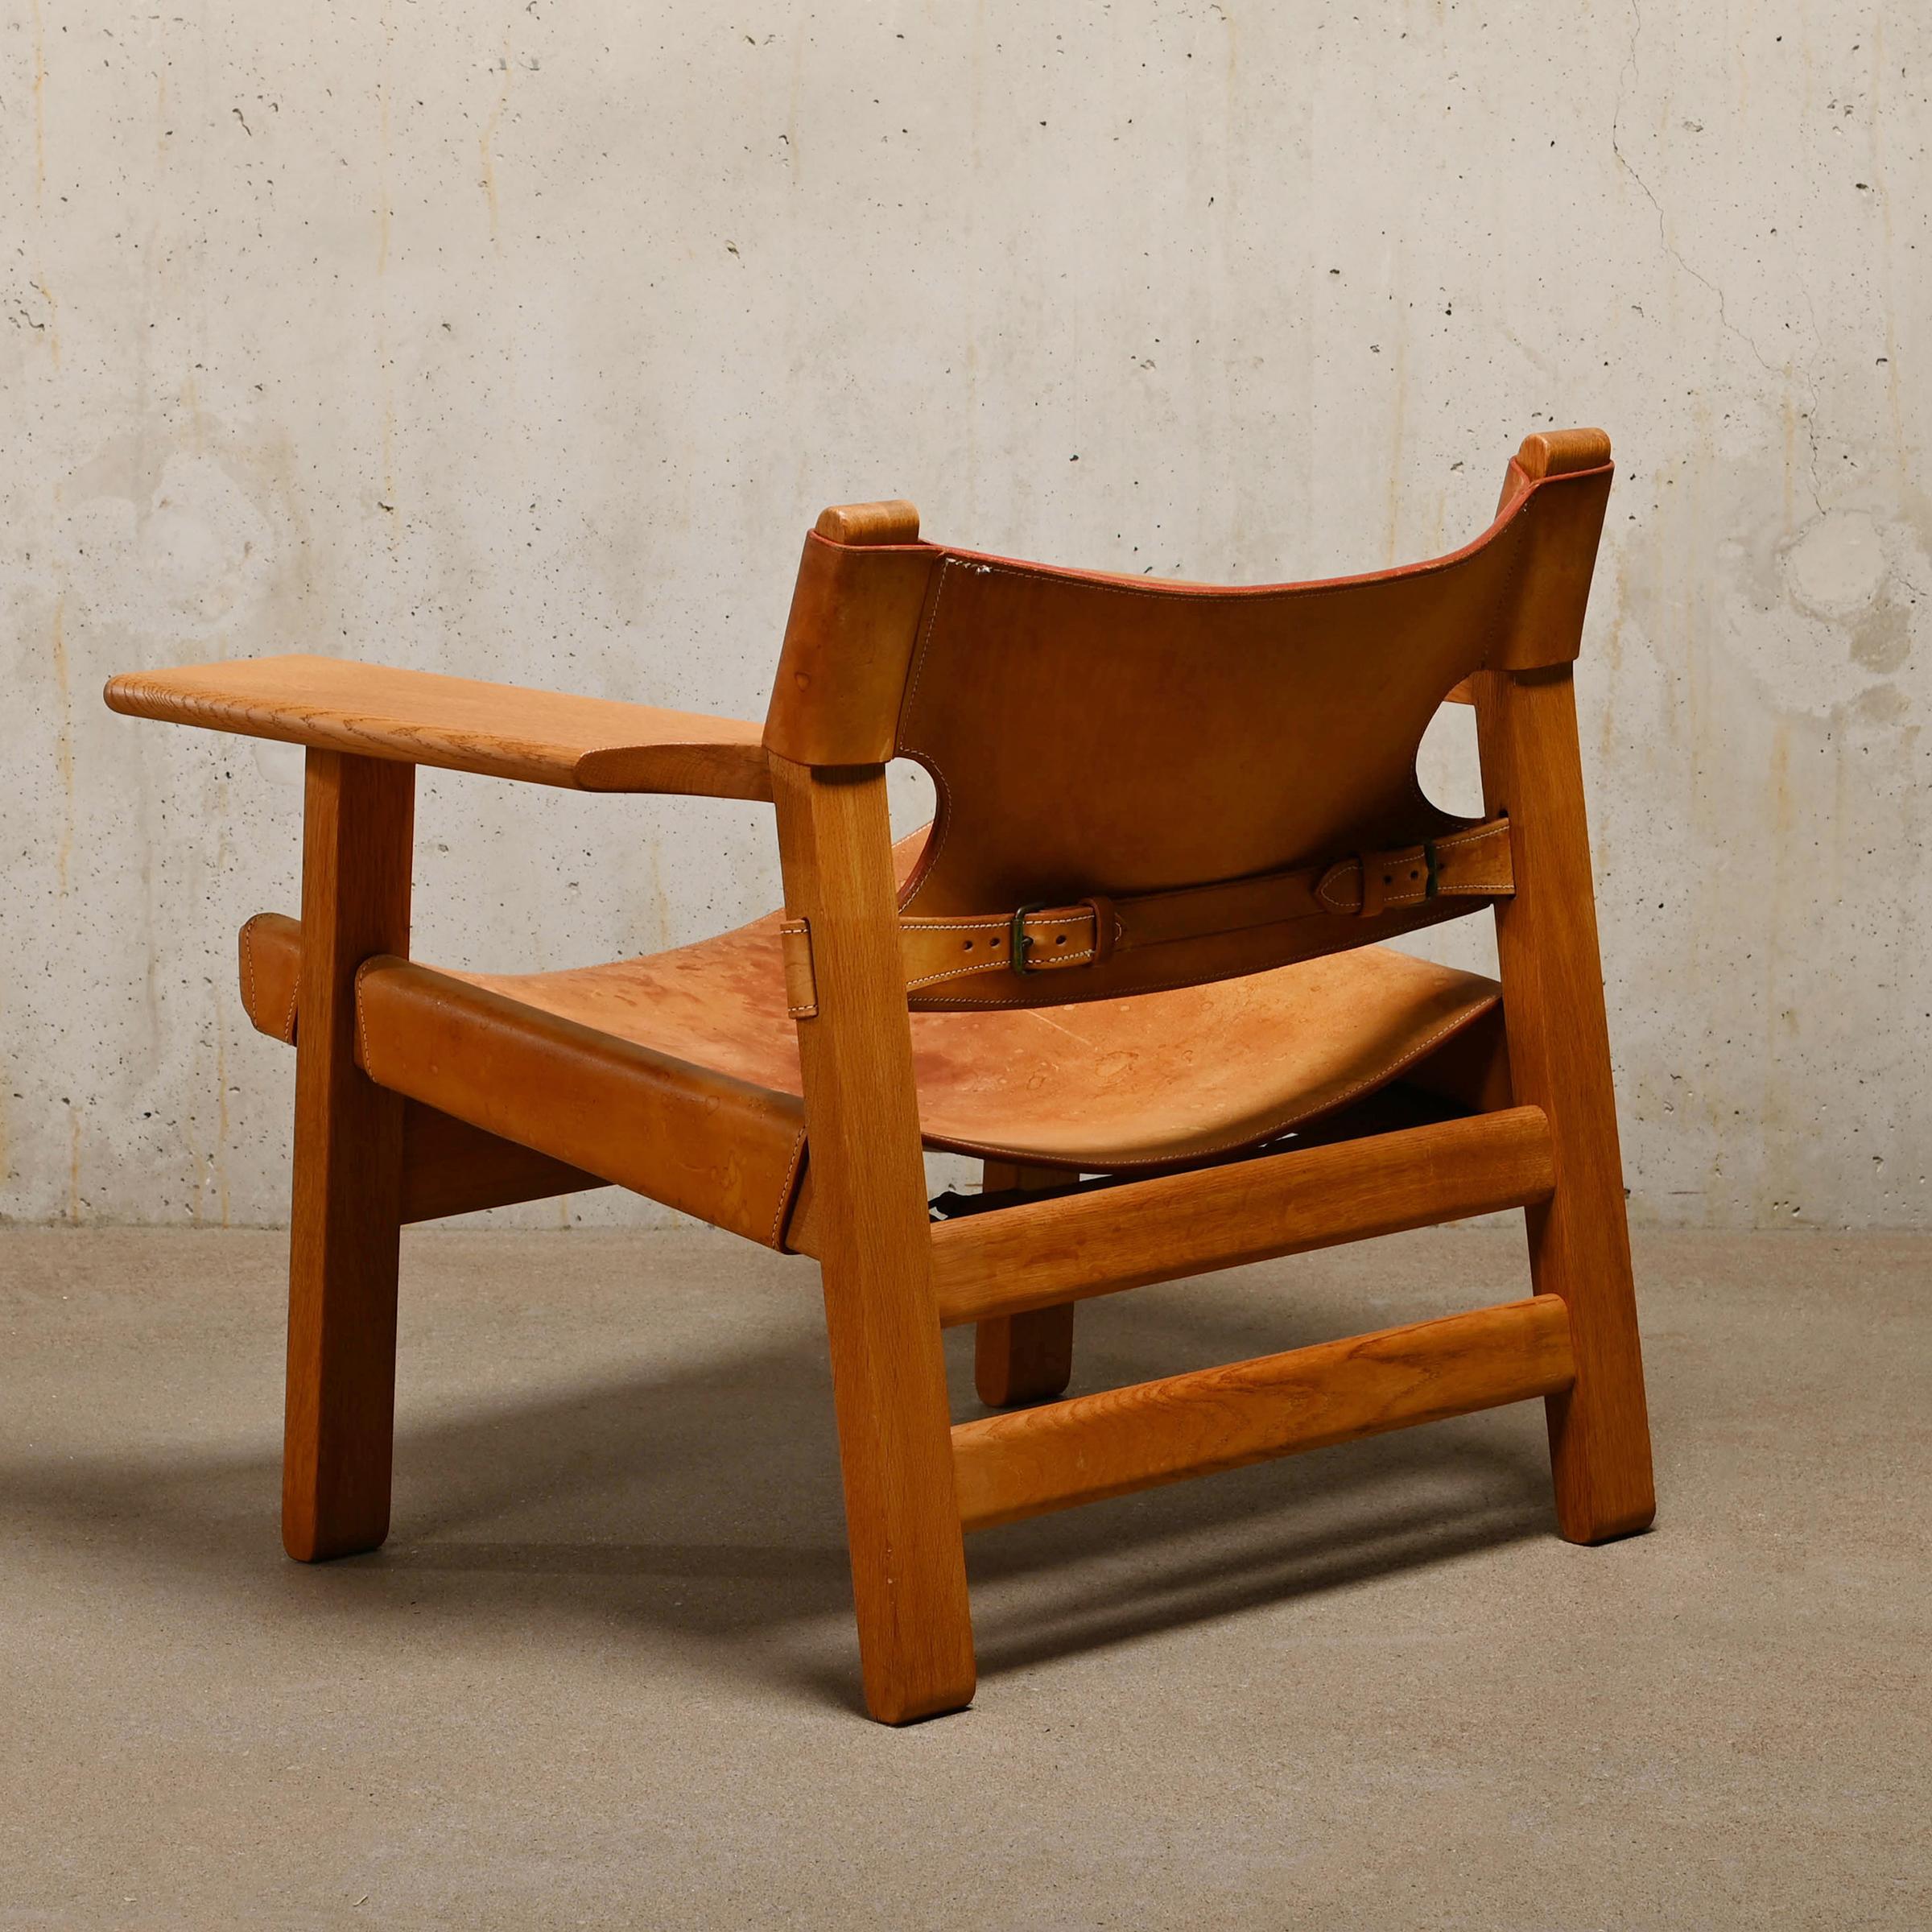 Mid-20th Century Børge Mogensen Spanish Chair in Cognac Leather and Oak for Fredericia